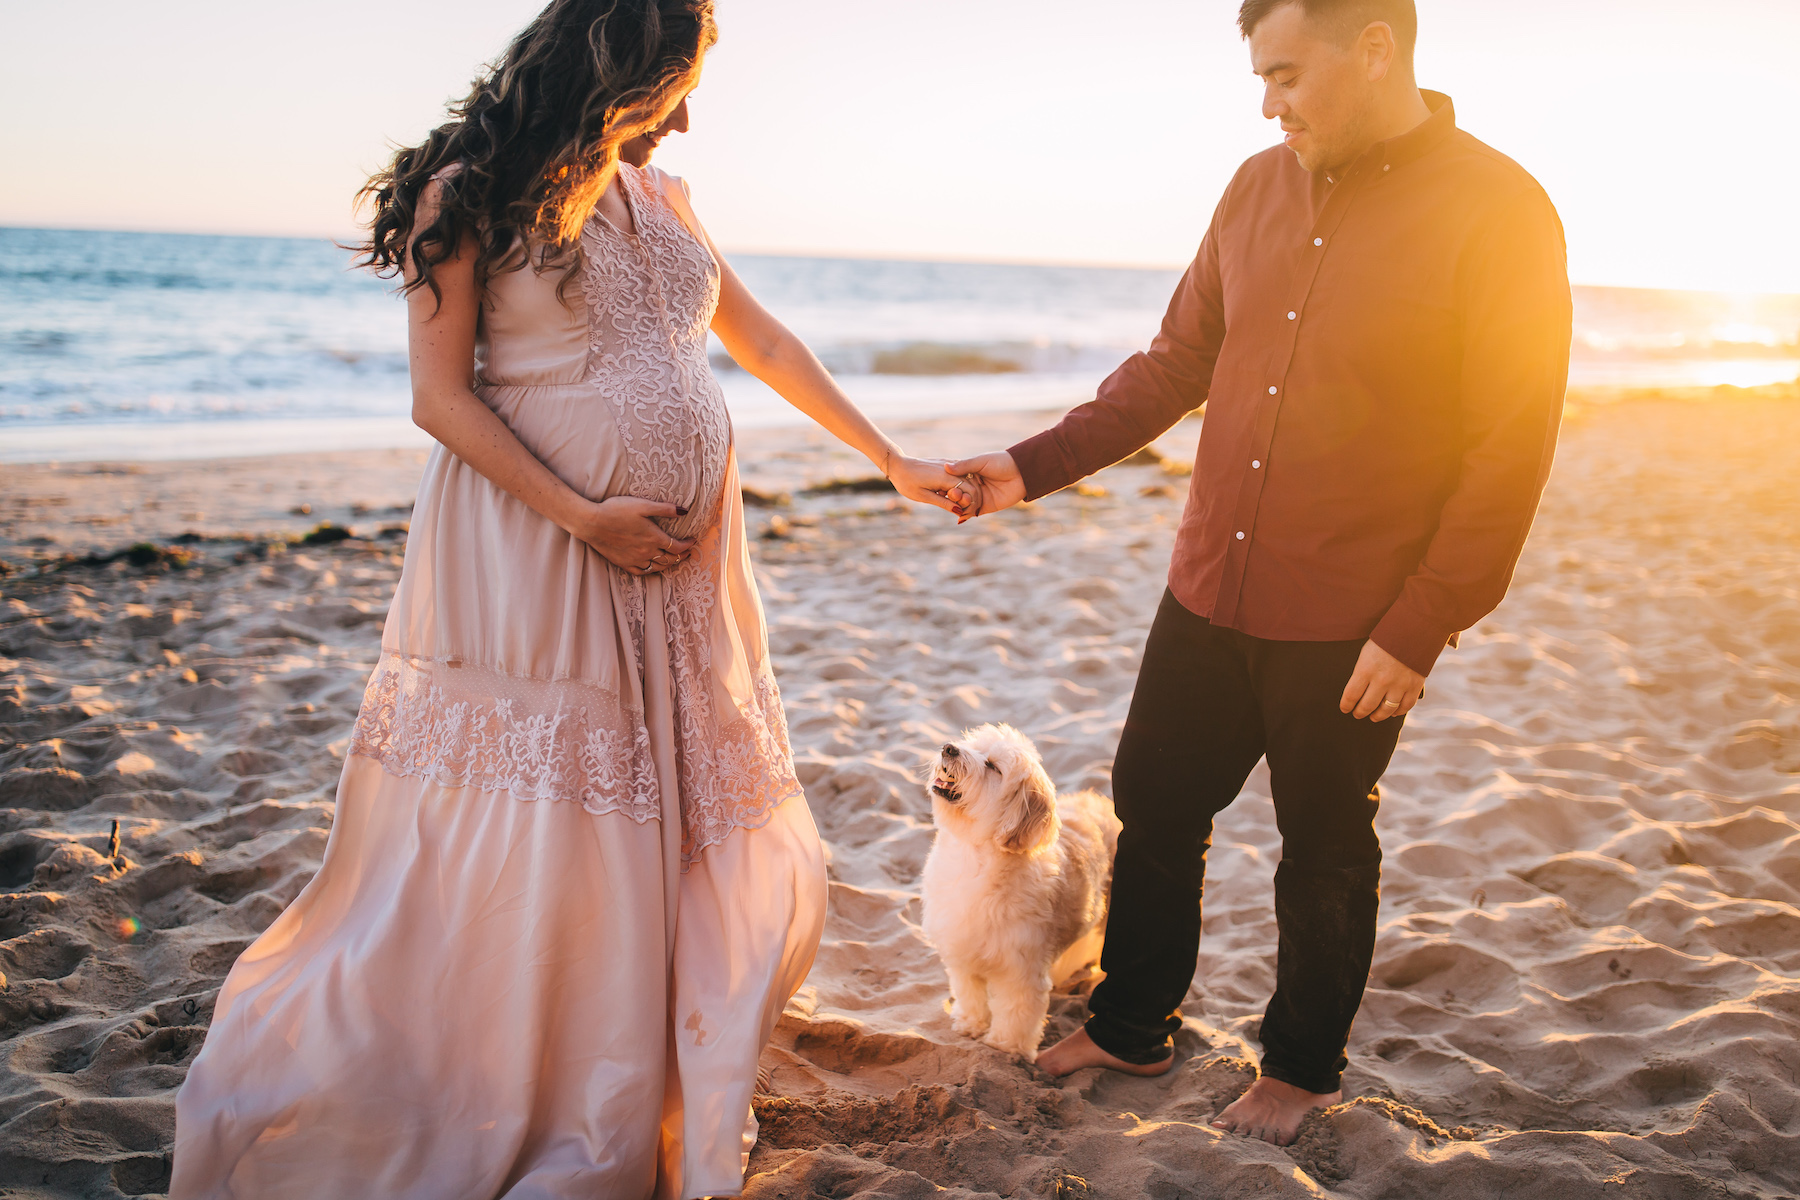 Here’s Why All Women Should Take Maternity Photos